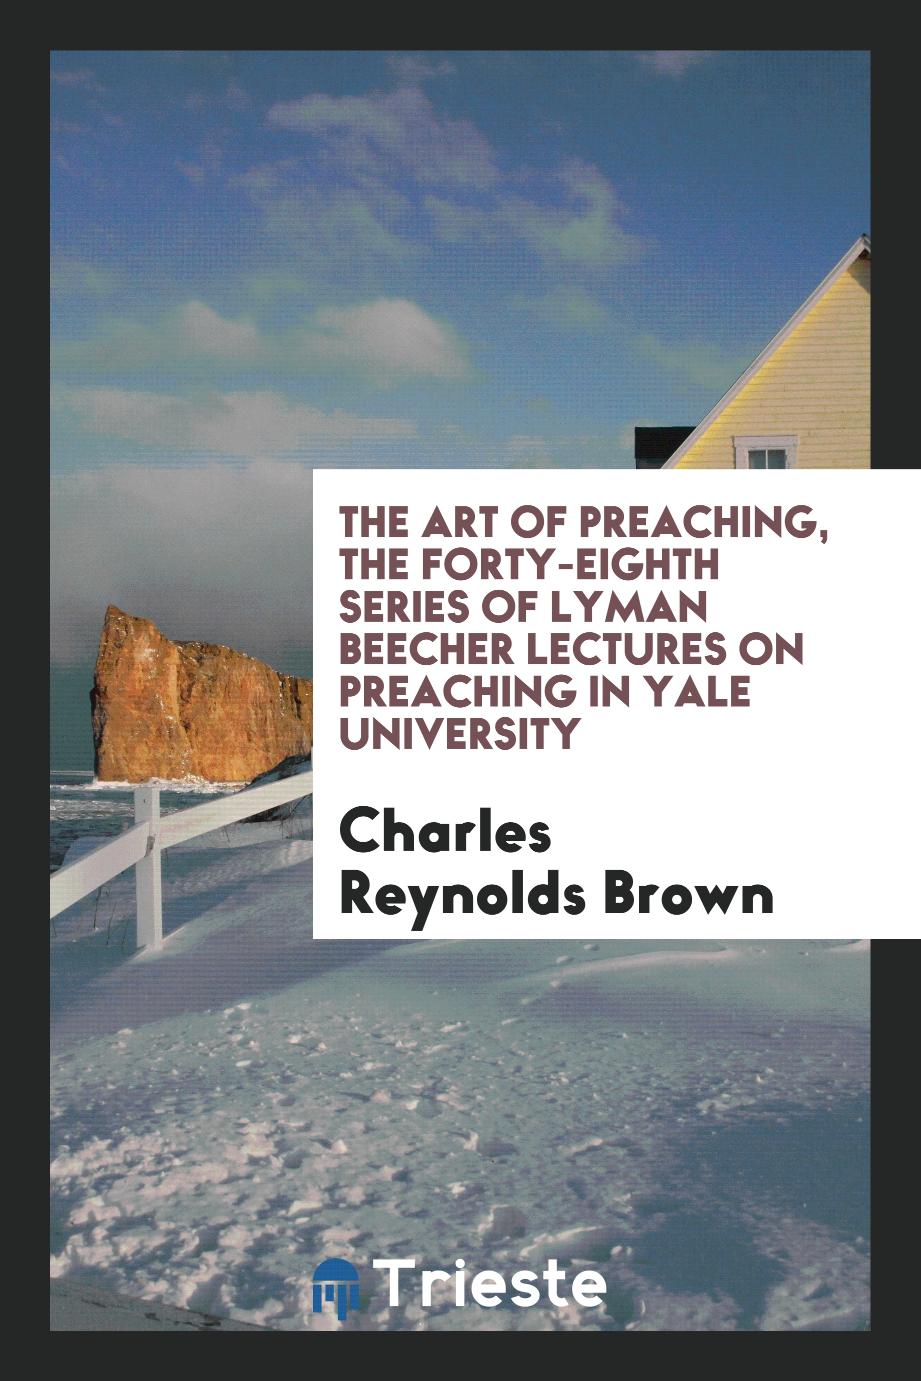 The Art of Preaching, the Forty-Eighth Series of Lyman Beecher Lectures on Preaching in Yale University